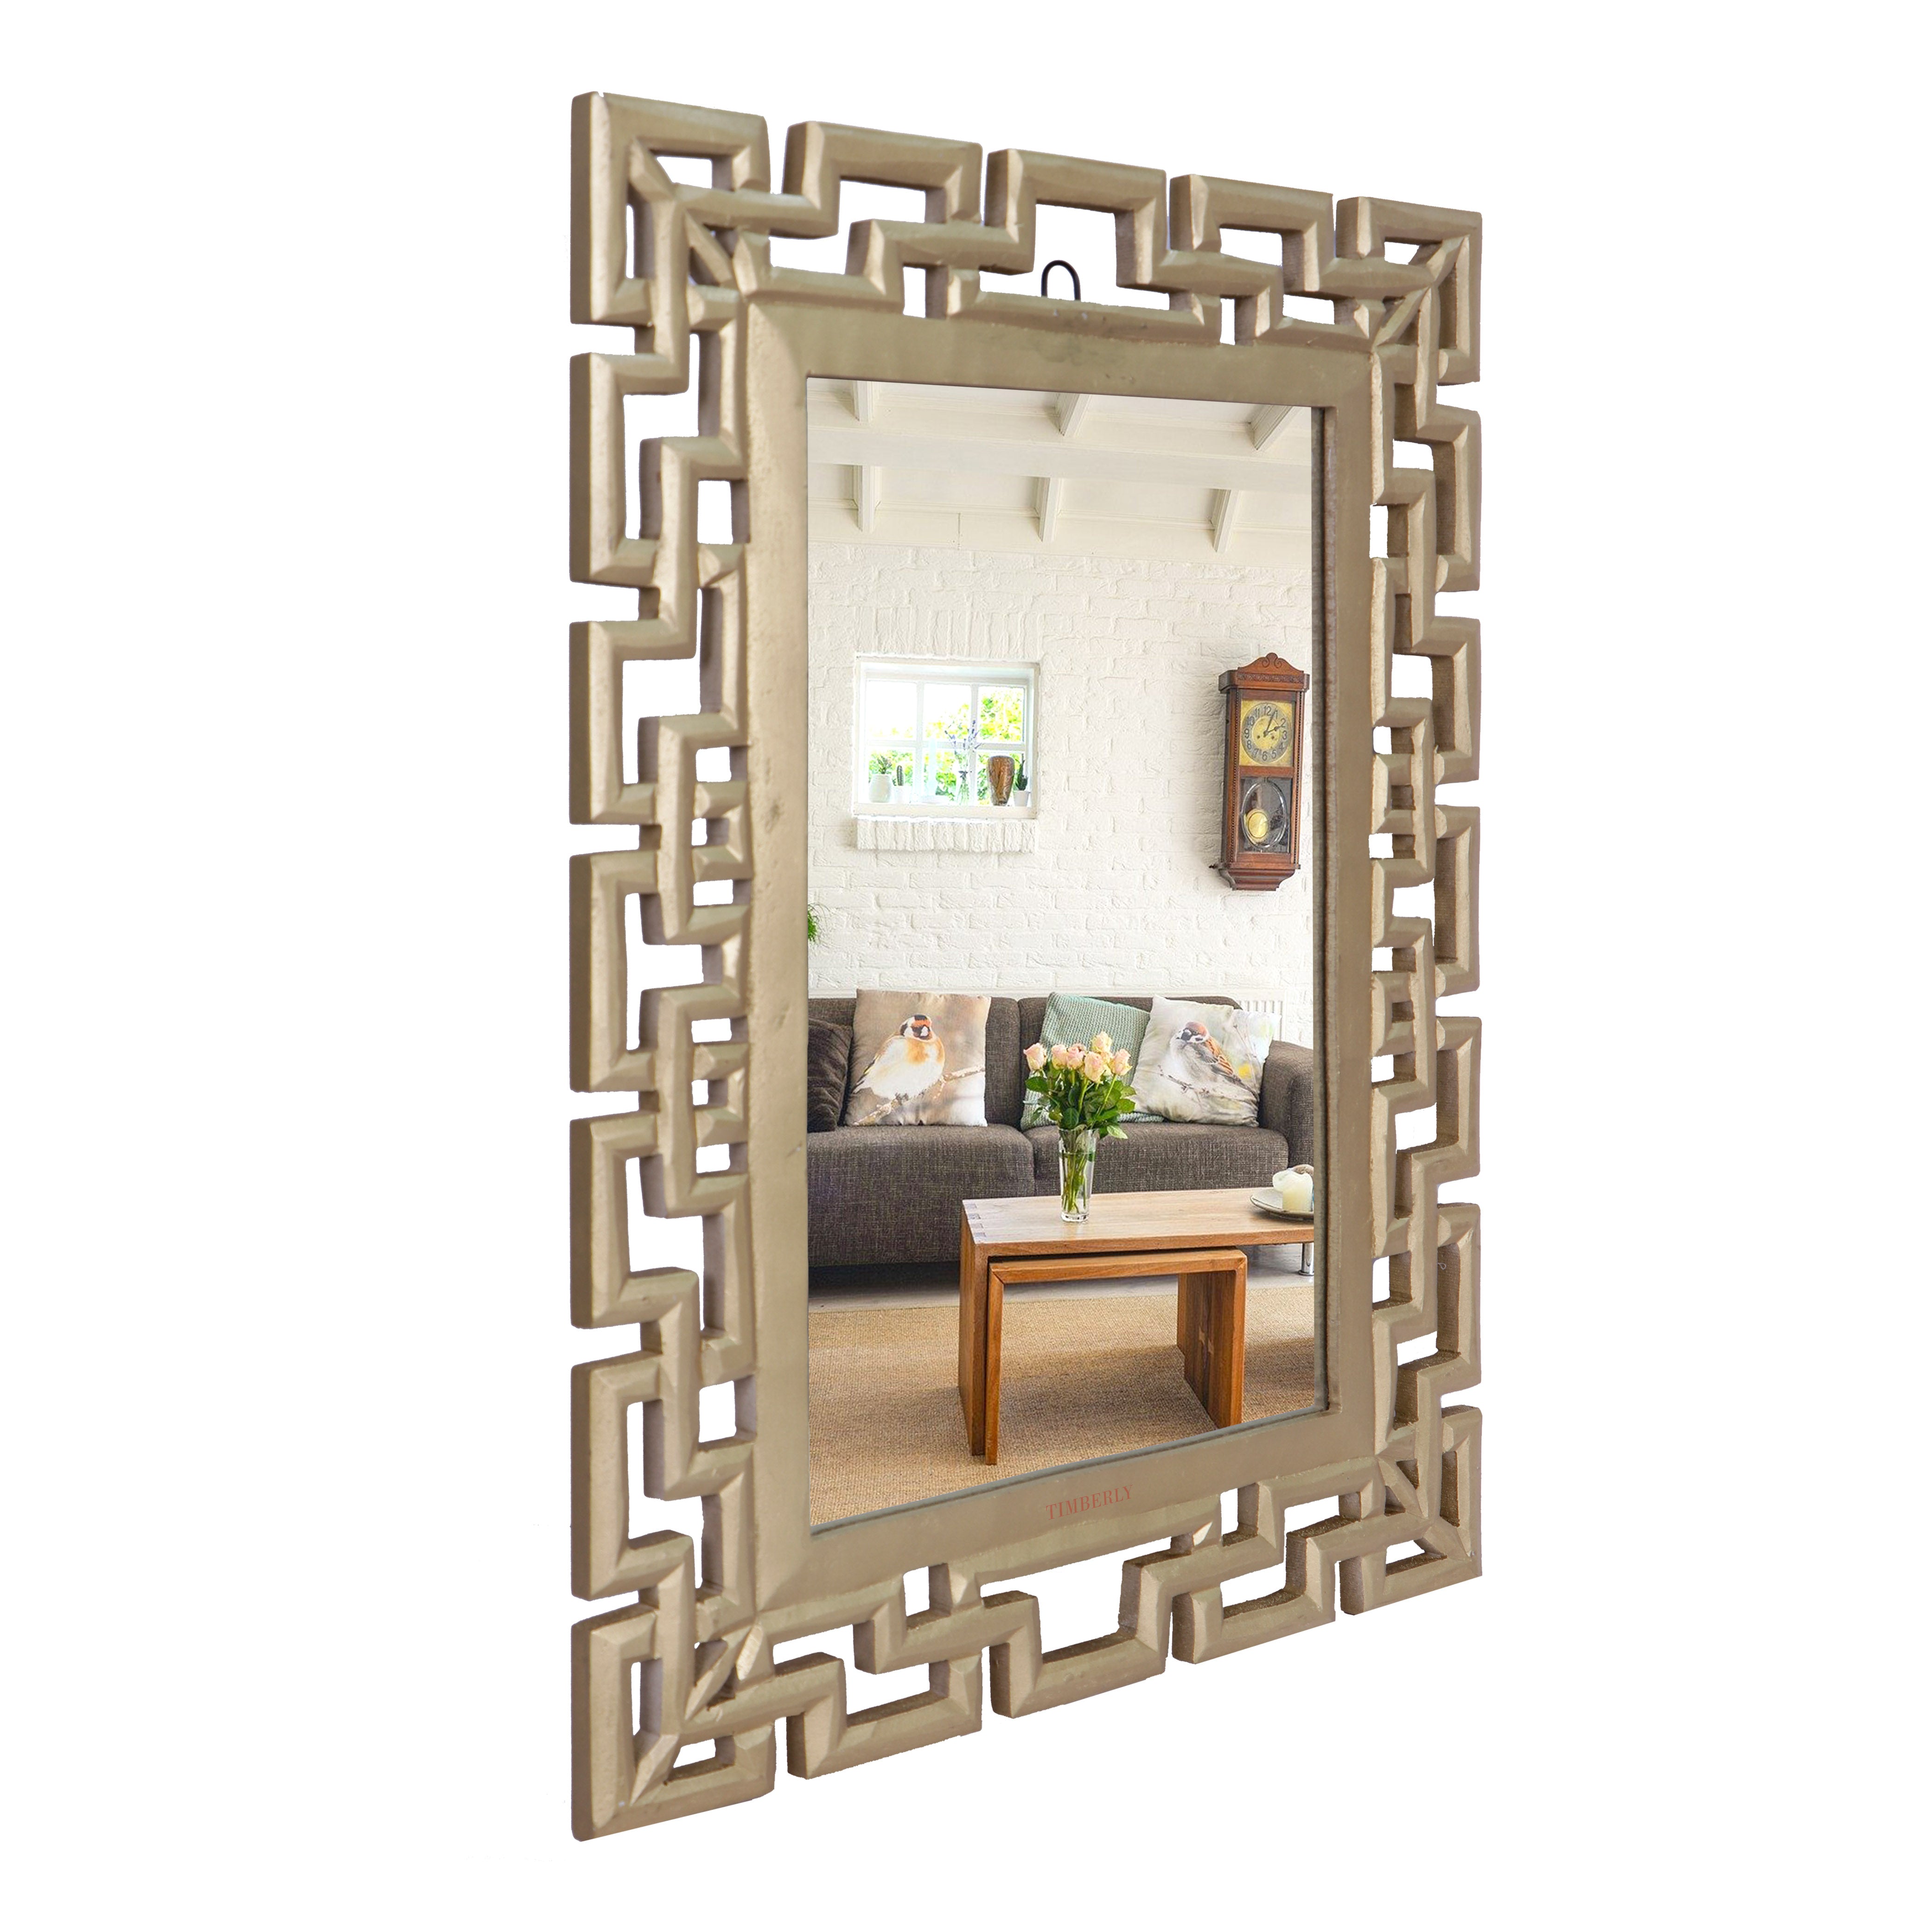 Hand Crafted MDF Wooden Ring Design Decorative Wall Mirror in Gold - Set Of 1 (24 x 18 Inch)